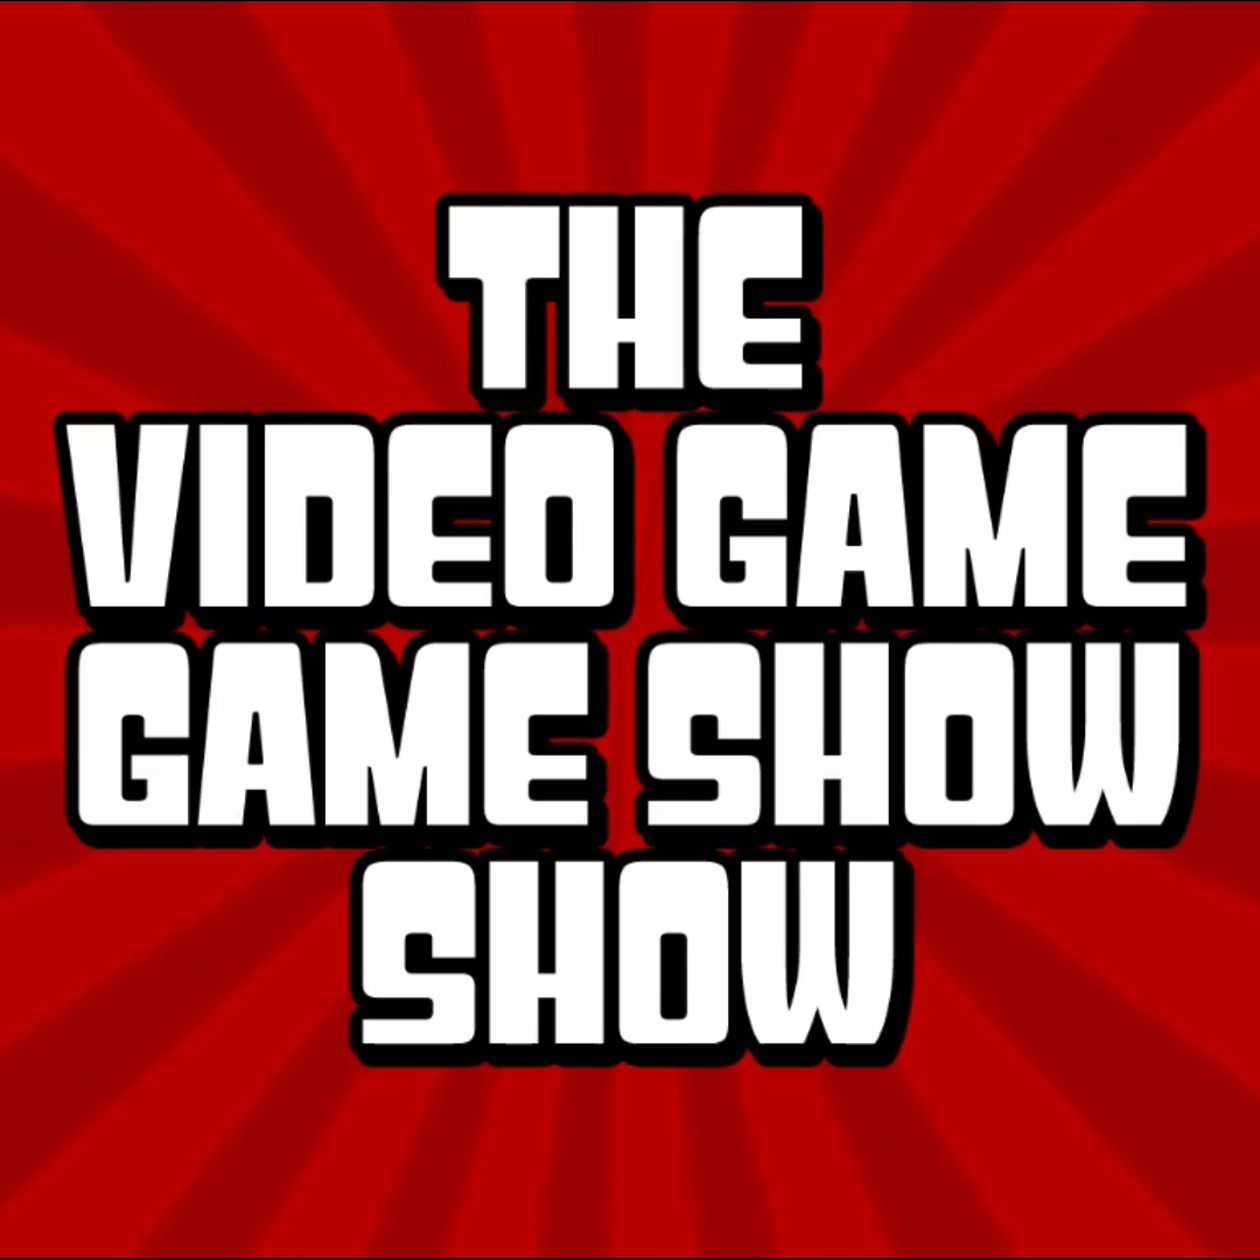 The Video Game Game Show Show